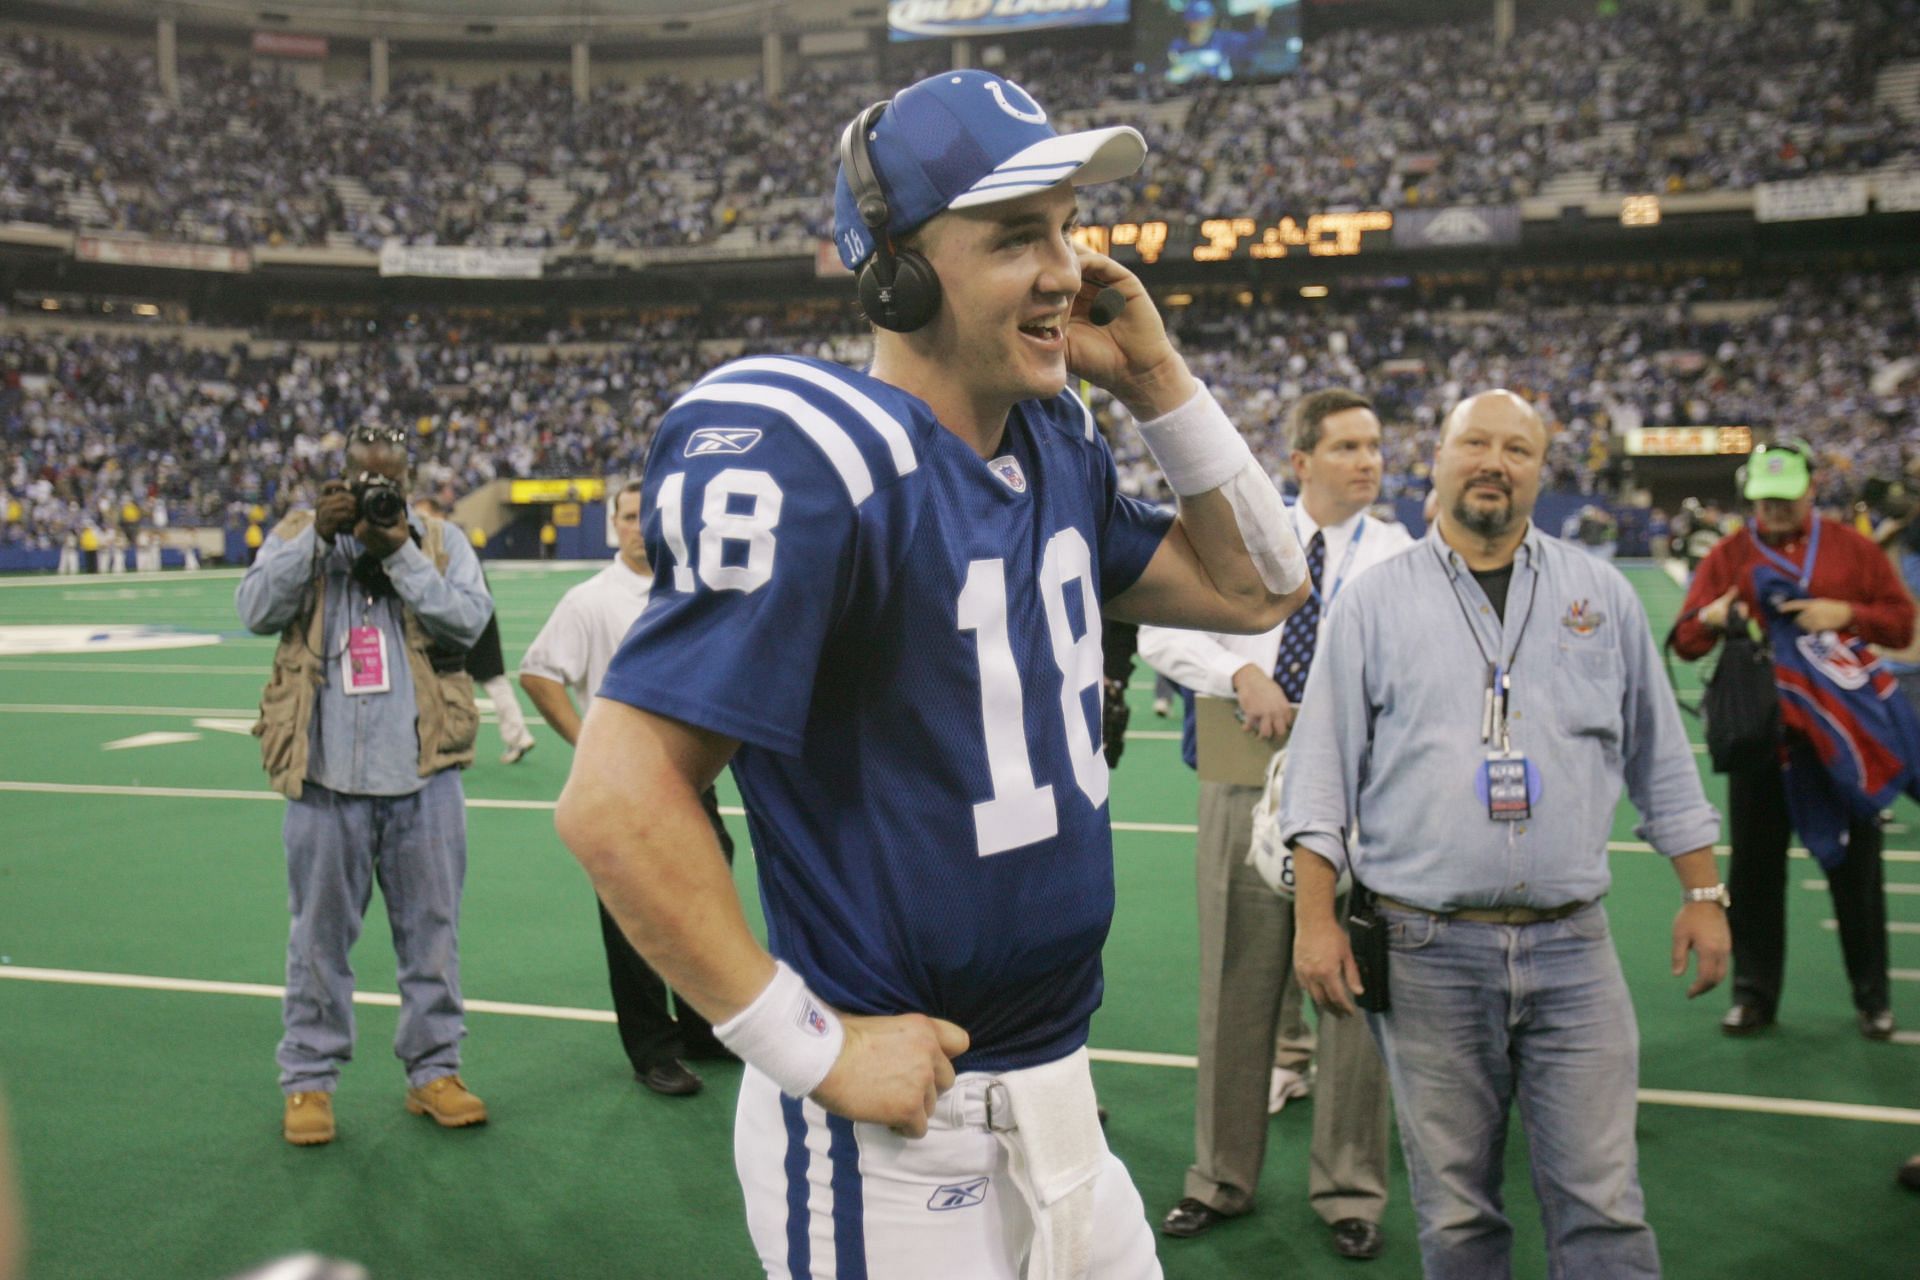 Even by his own massive standards, Thanksgiving 2004 was a victorious showcase for Peyton Manning (Photo: Getty)